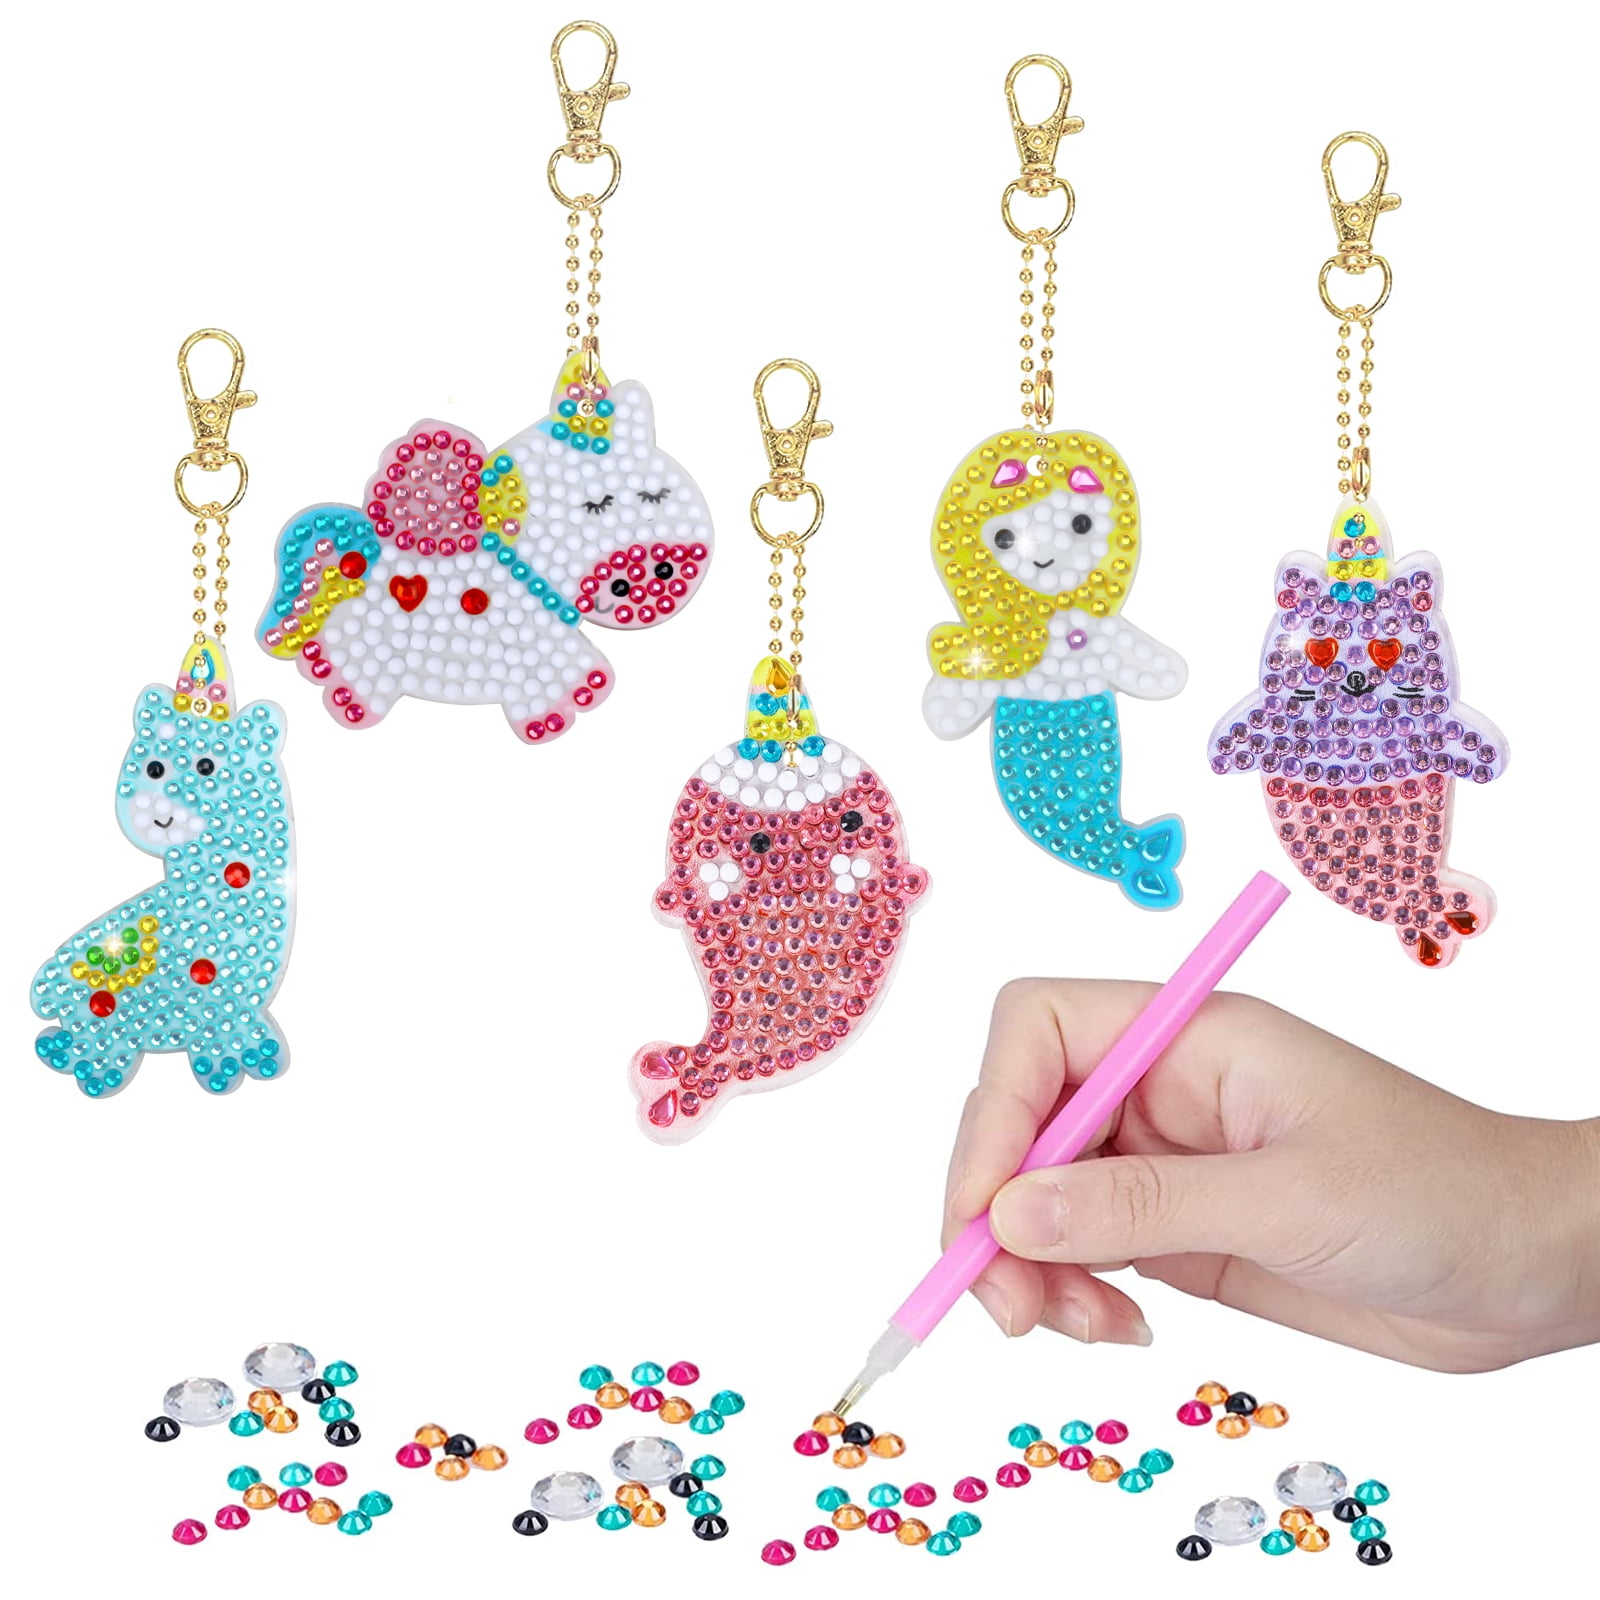 Arts And Crafts For Kids Ages 8-12 - Make Your Own Gem Keychains